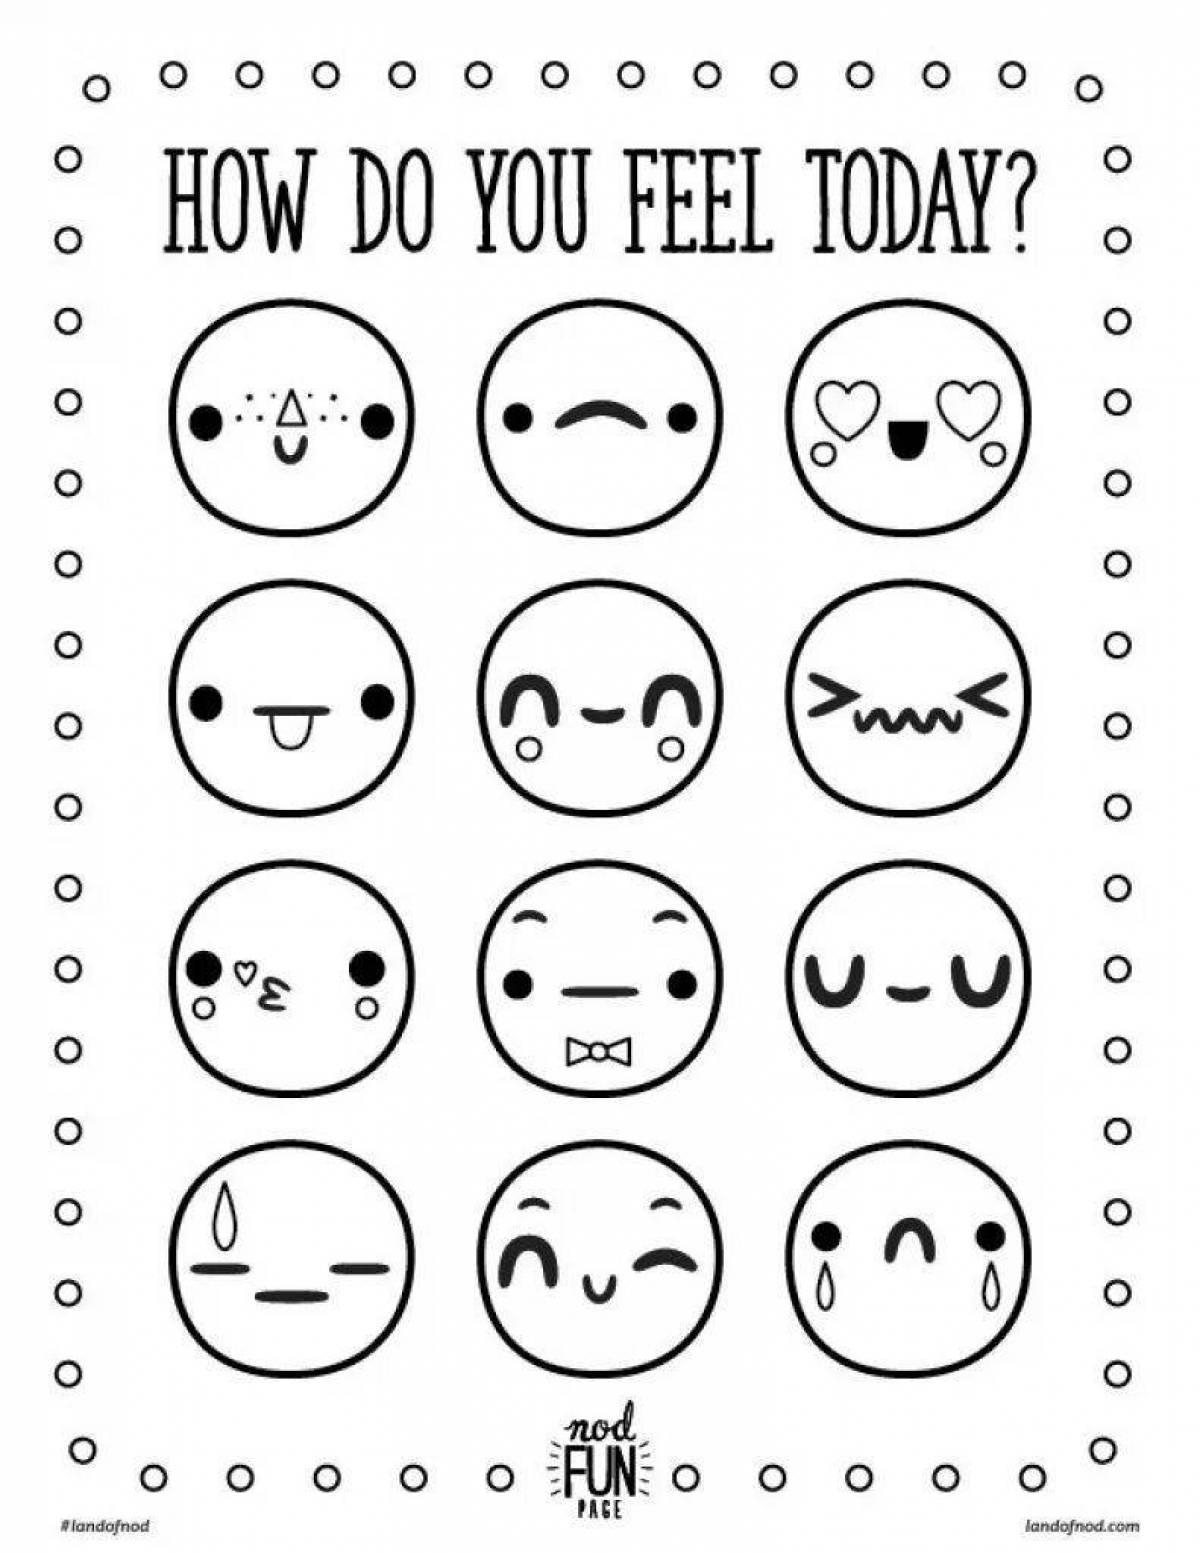 Vibrant coloring pages of emotion emoticons